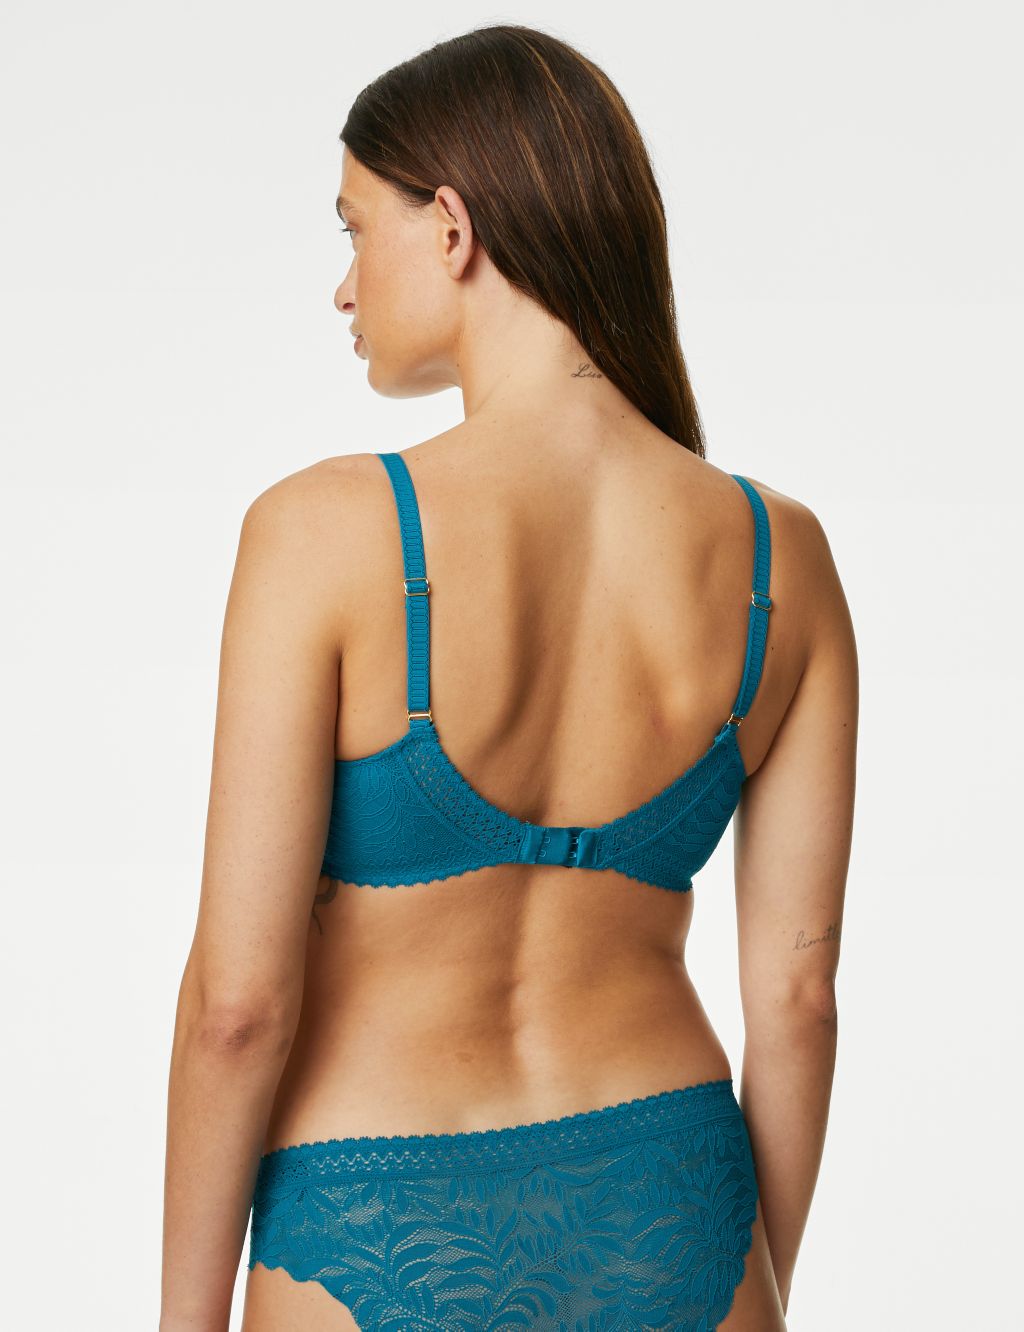 Flexifit™ Lace Wired Full Cup Bra A-E image 4